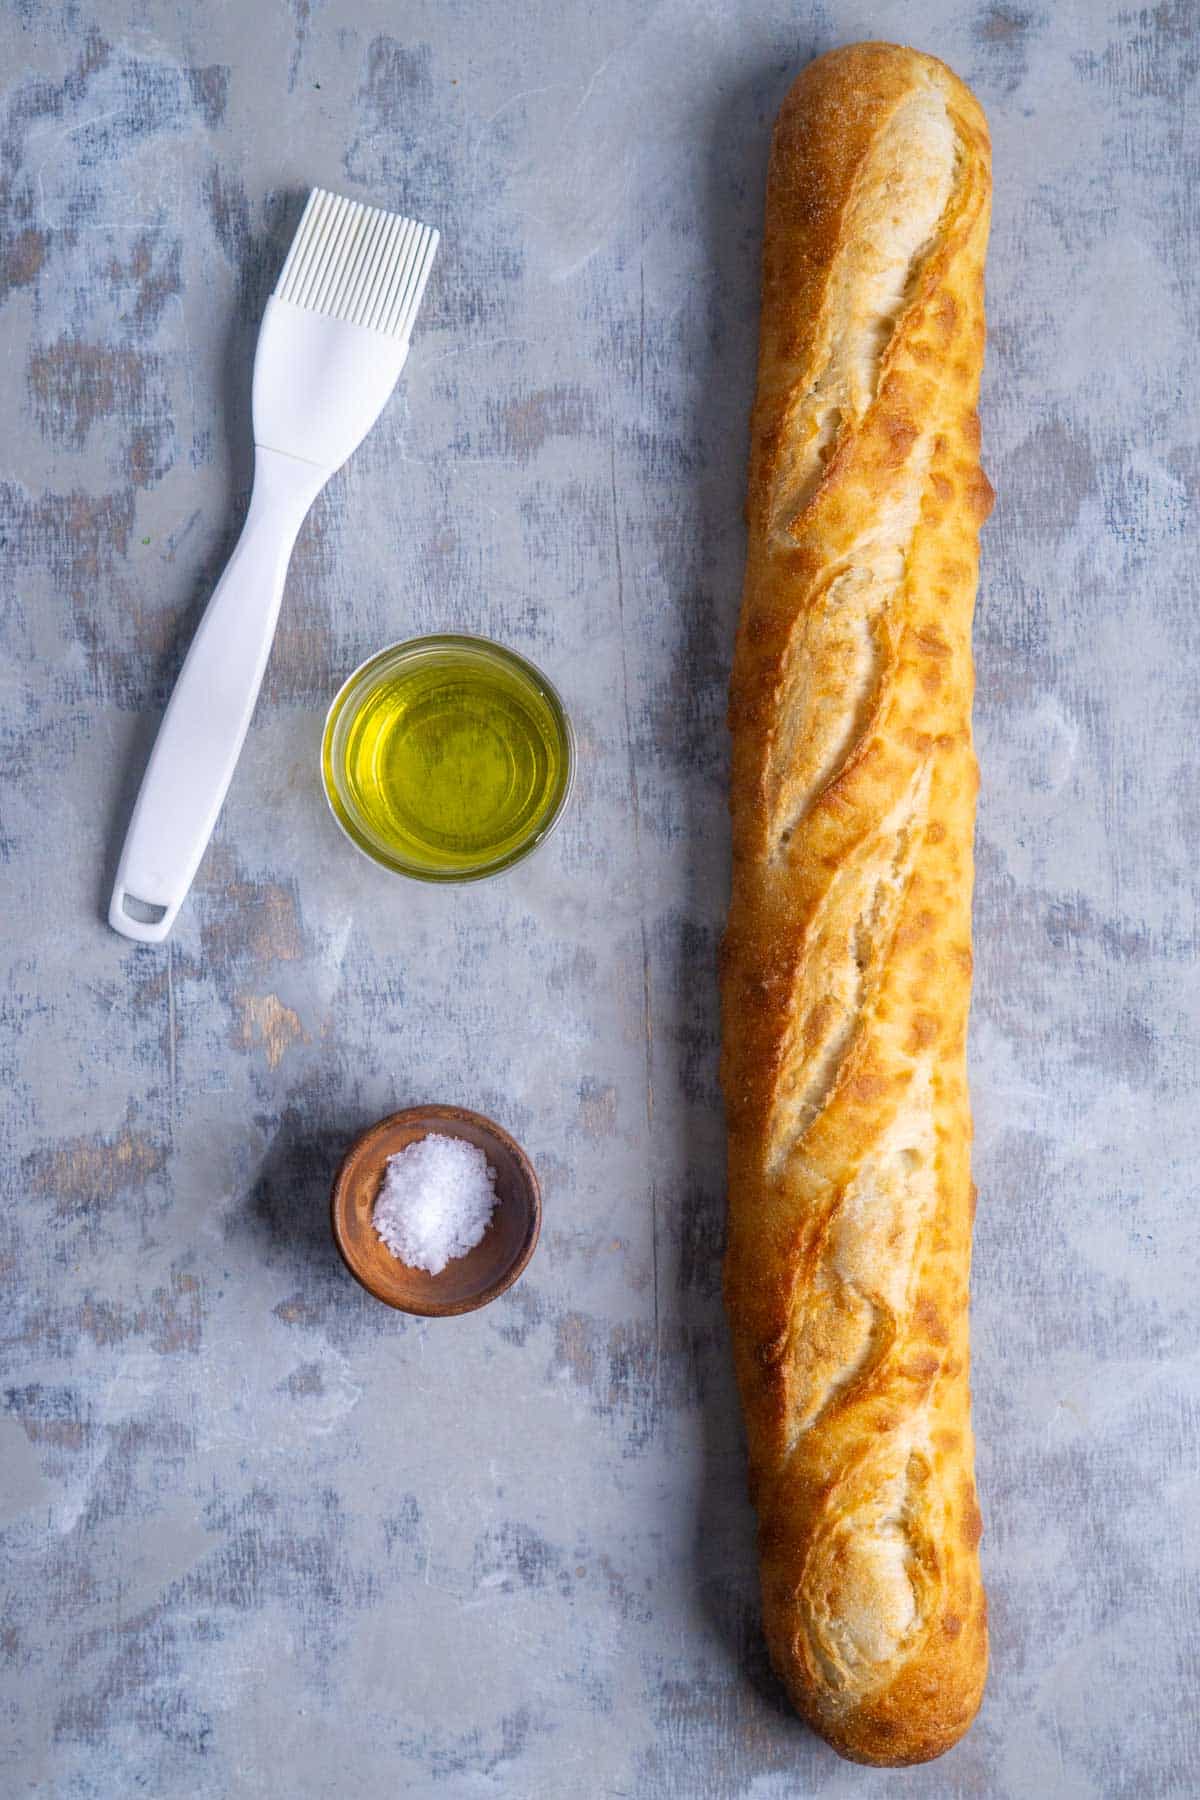 whole baguette next to glass jar of olive oil, wood bowl of salt, and white silicone pastry brush